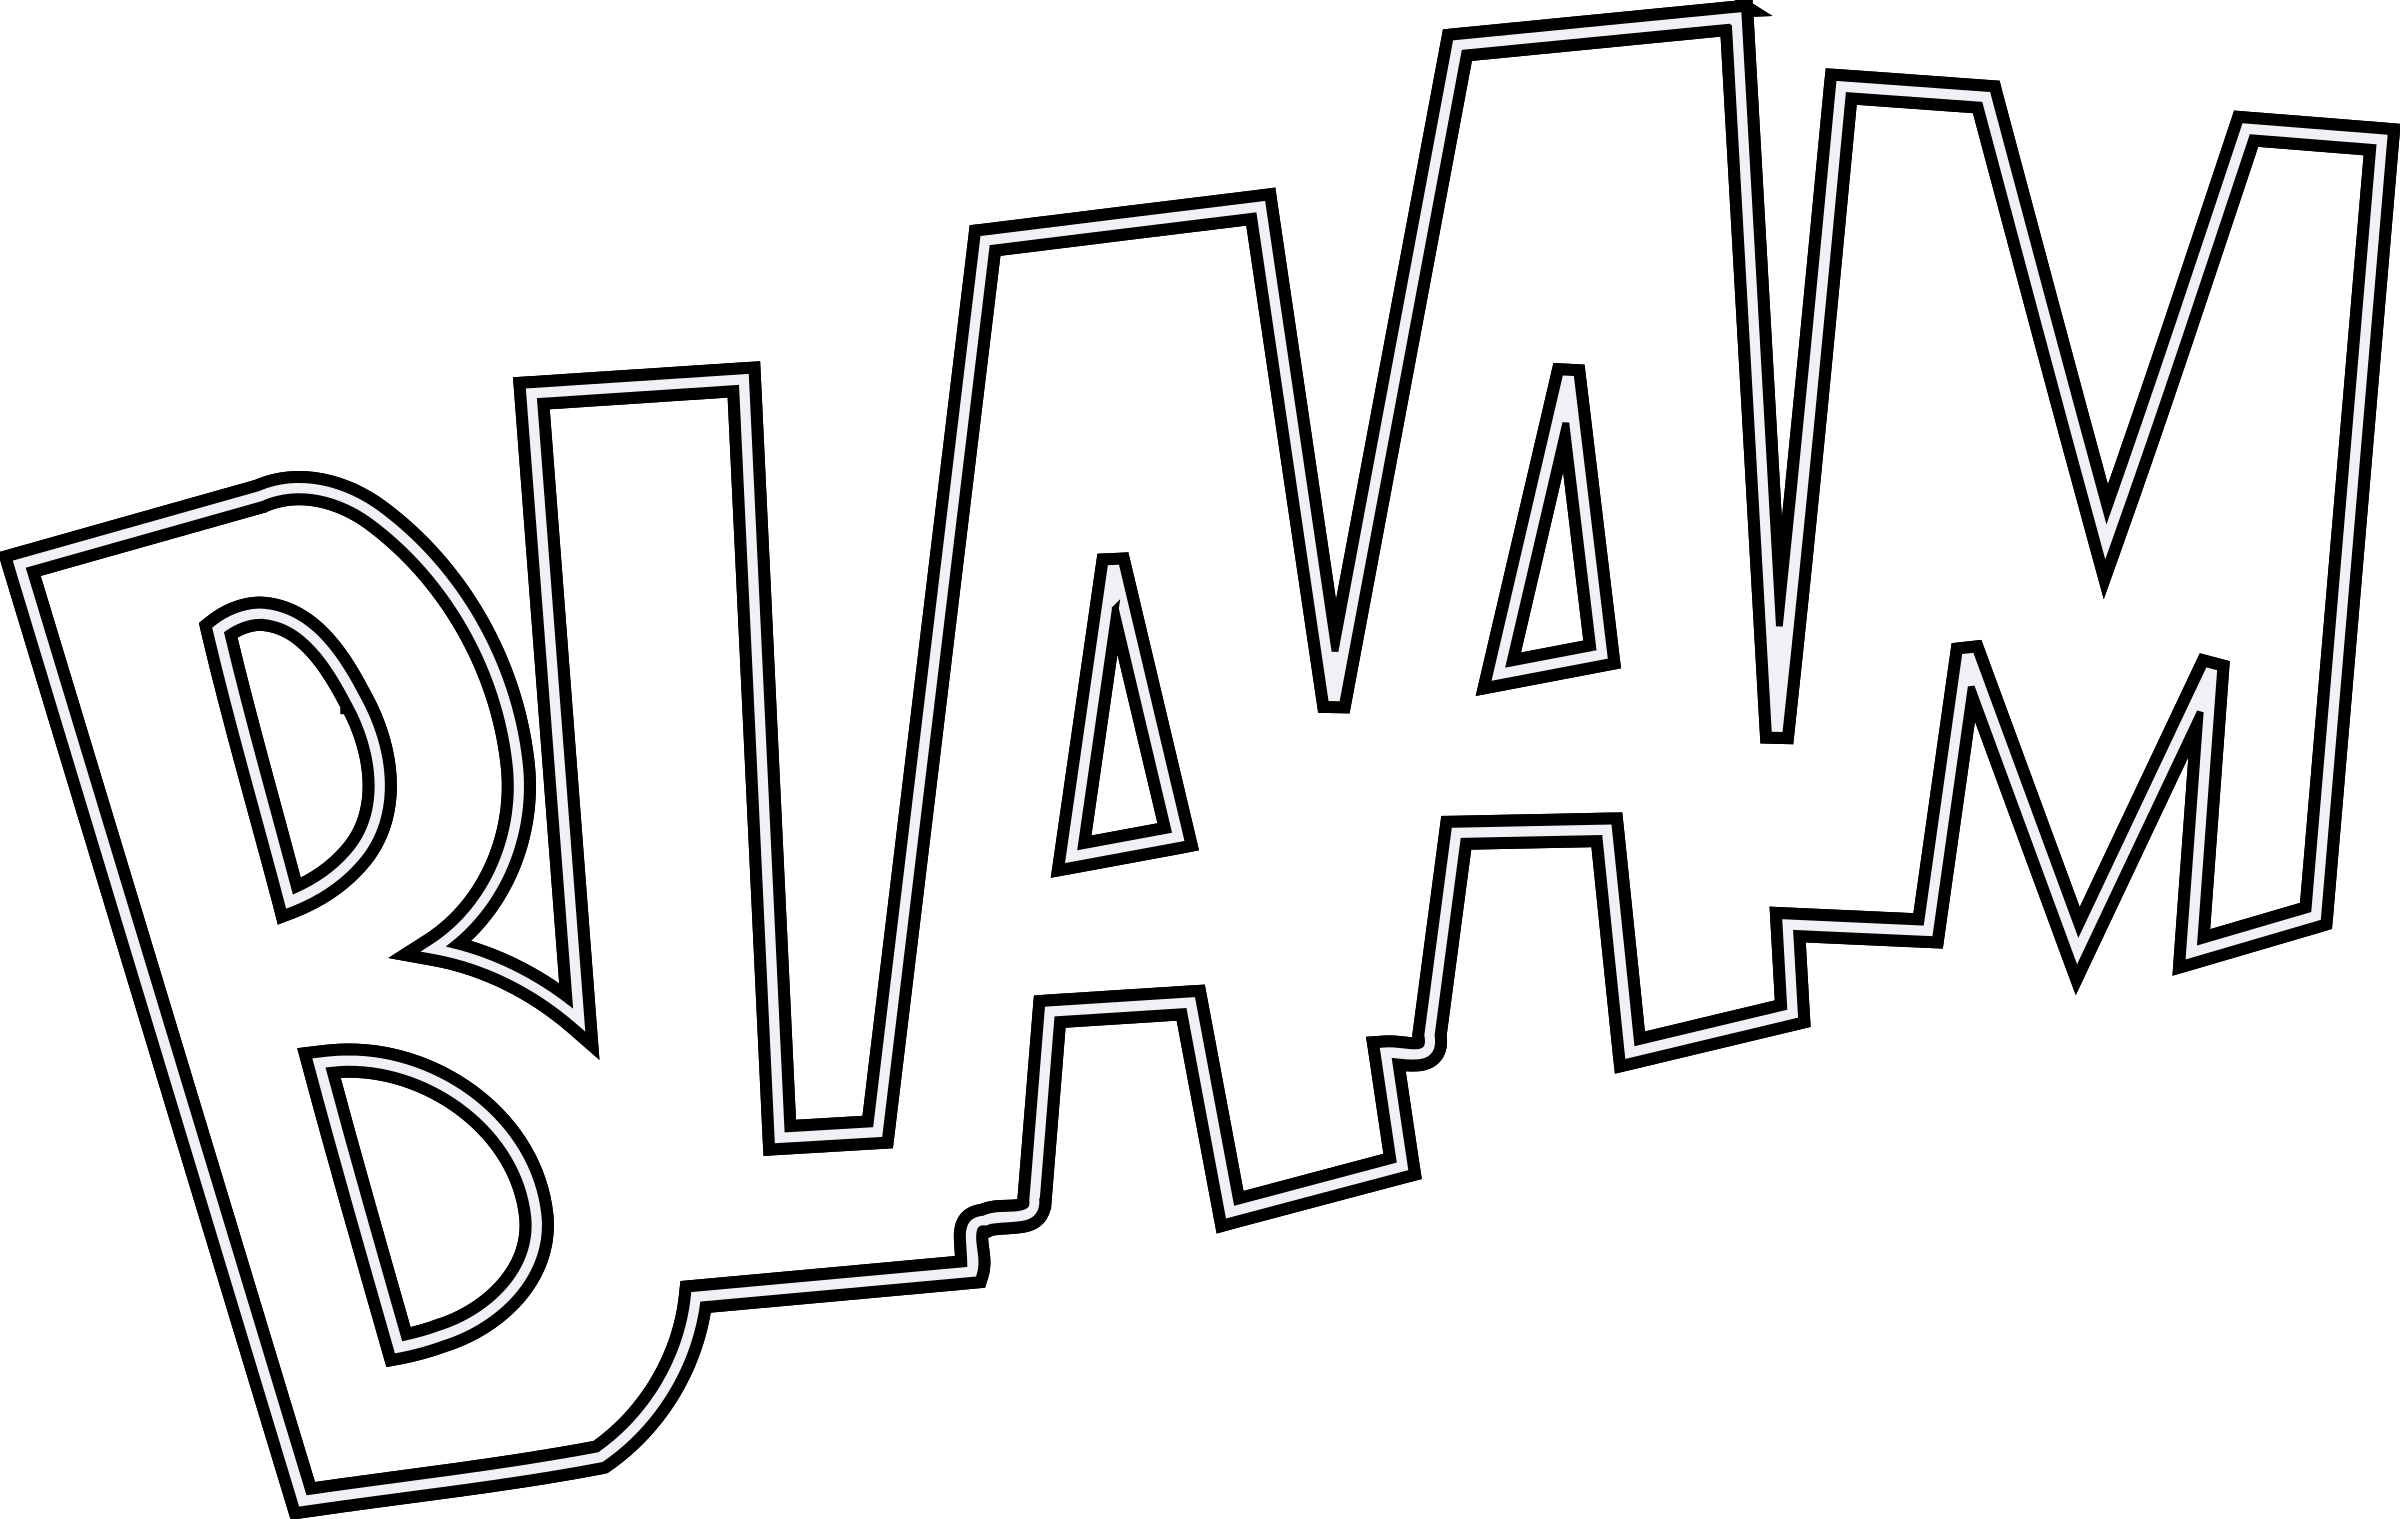 BLAAM outlined SVG Clip arts